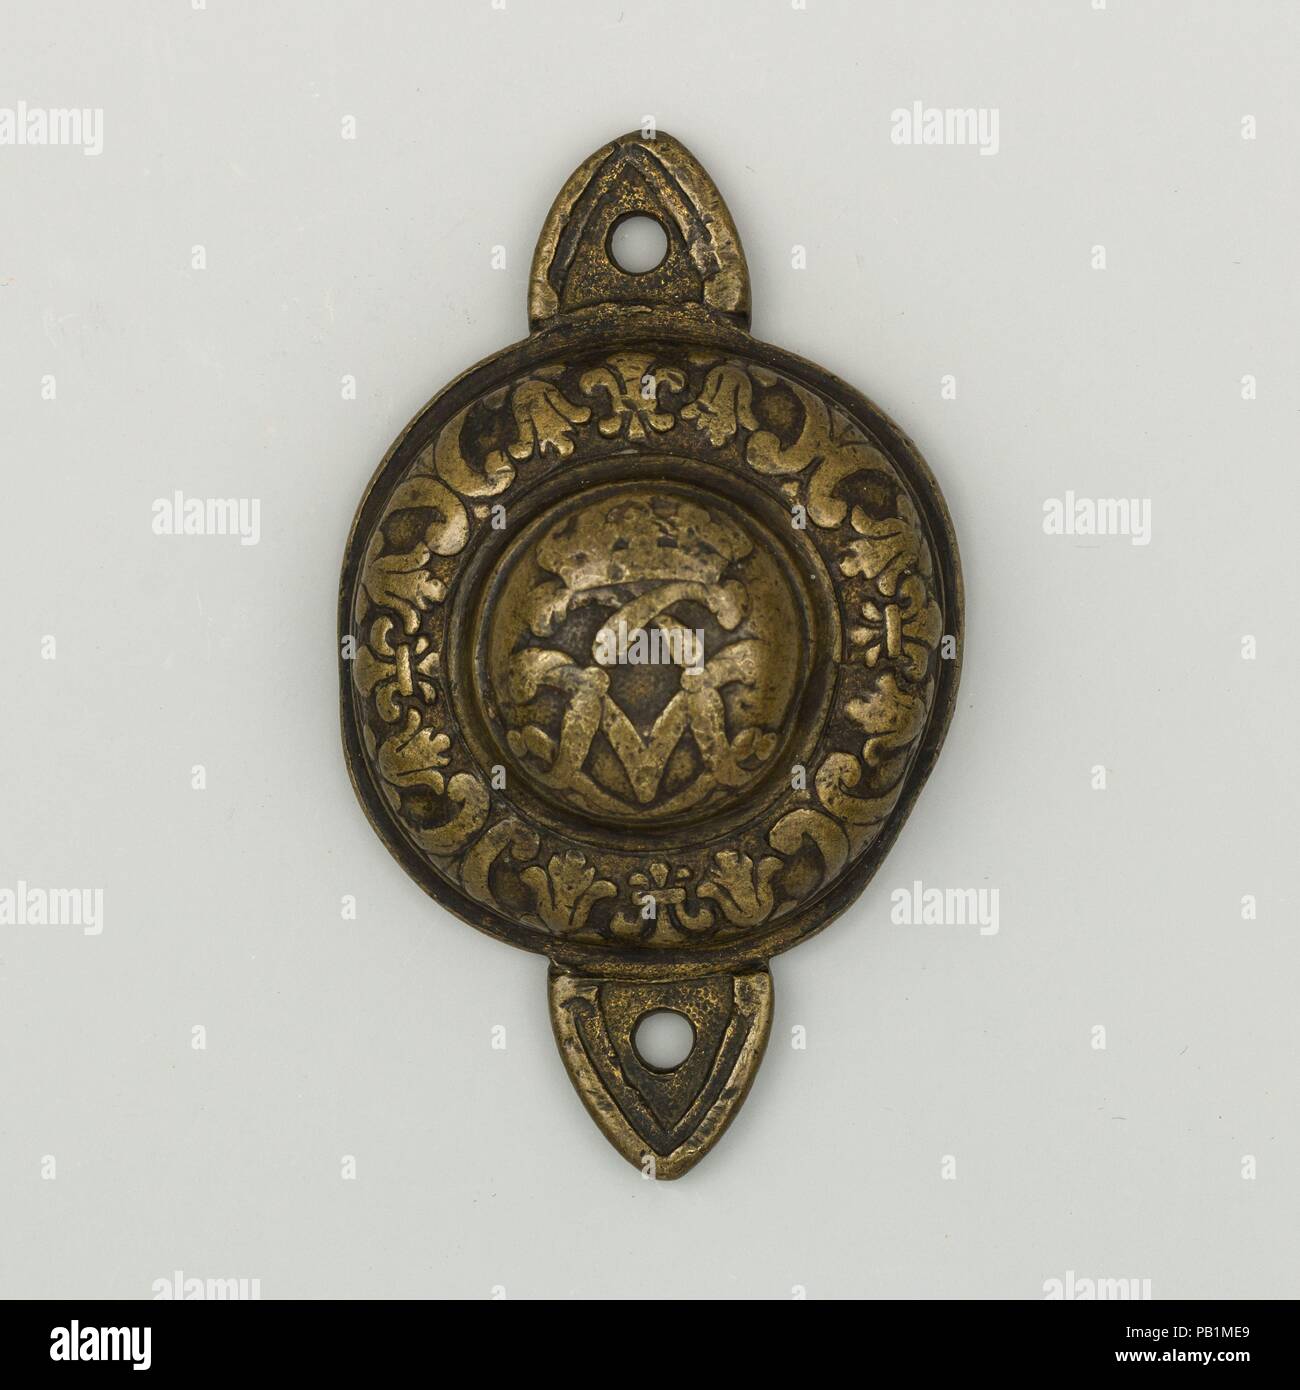 Bit Boss. Culture: French. Dimensions: Diam. 3 5/16 in. (8.4 cm); Wt. 2.4 oz. (68 g). Date: first half 18th century.  The rim of this bit boss is decorated with four fleurs-de-lis. At its center are the two interlaced Ls of King Louis XIV (r. 1643-1715) or, more likely, King Louis XV (r. 1715-1774), crowned at the top. What looks like a letter V behind the monogram is actually a very simplified representation of the two crossed palms often seen on this kind of composition.  This symbolism suggests that this boss decorated the side of a bit worn by a cavalry or a coach horse used by the French  Stock Photo